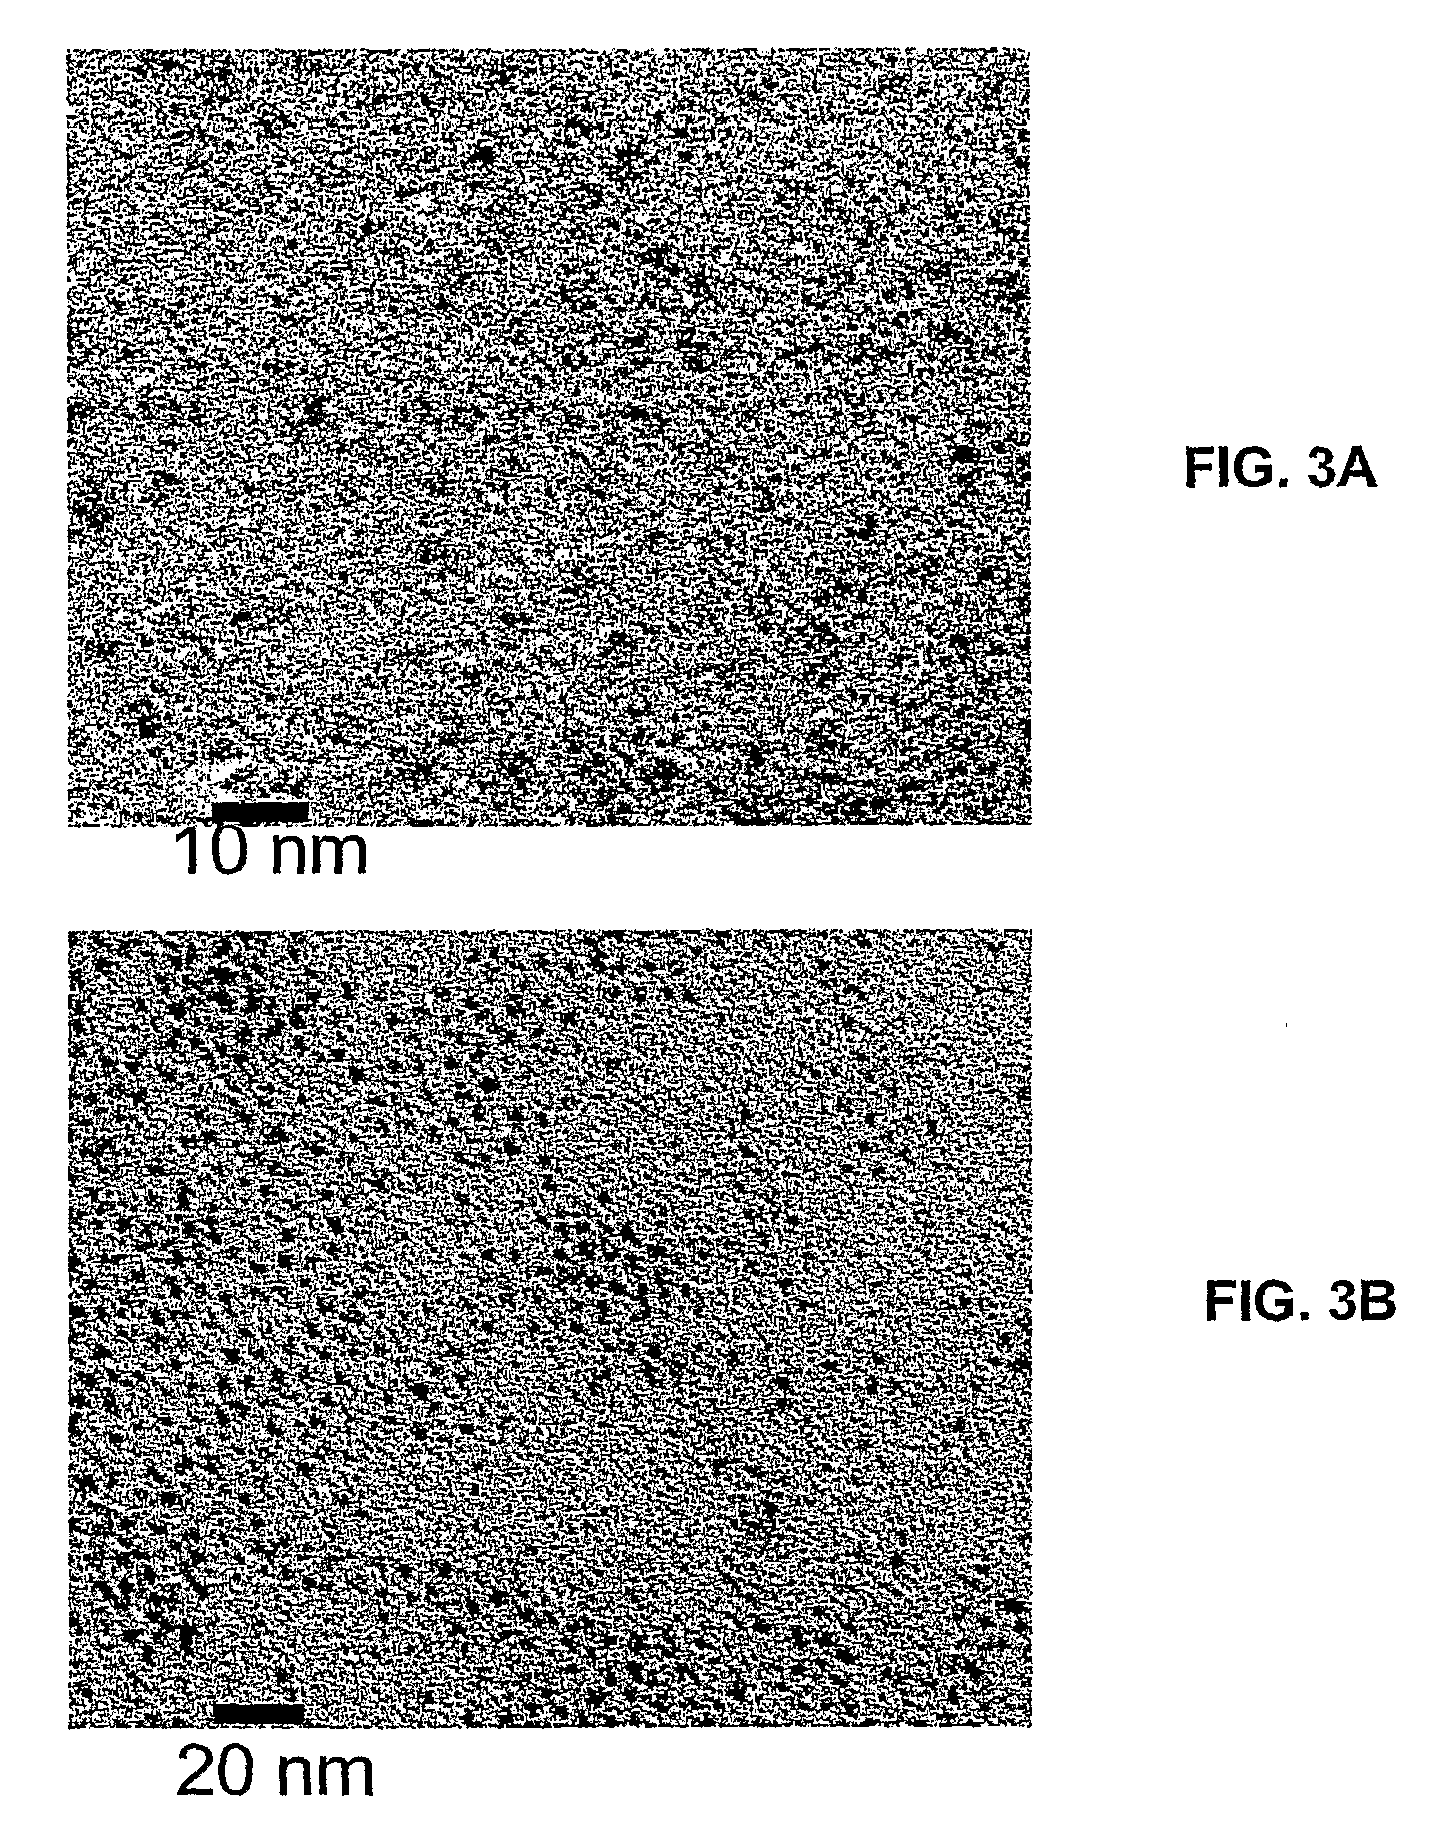 Nanoparticle Synthesis and Associated Methods